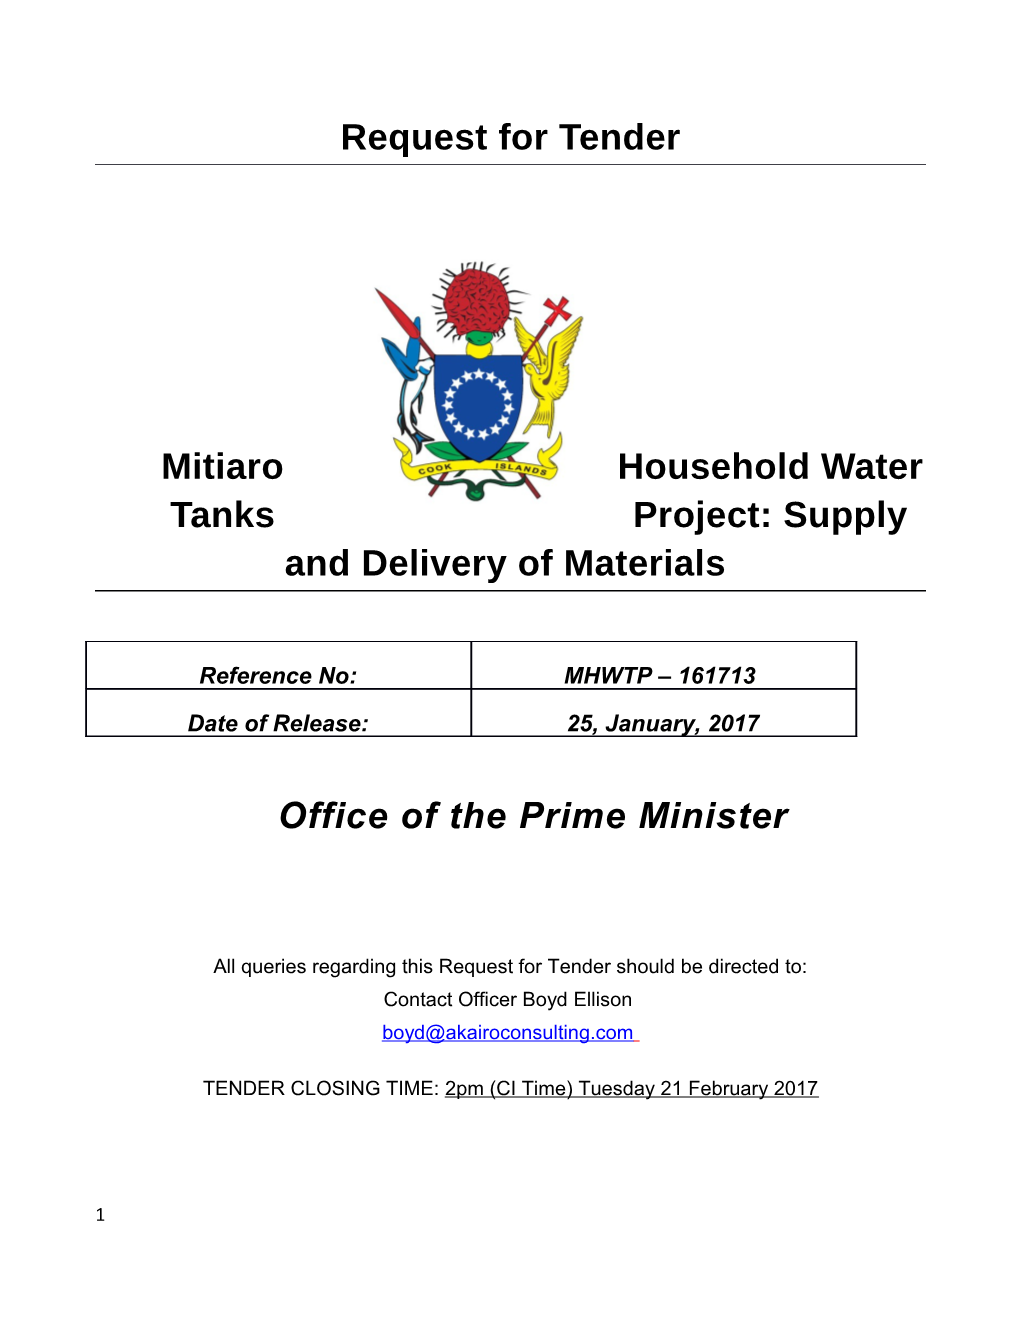 Mitiaro Household Water Tanks Project: Supply and Delivery of Materials